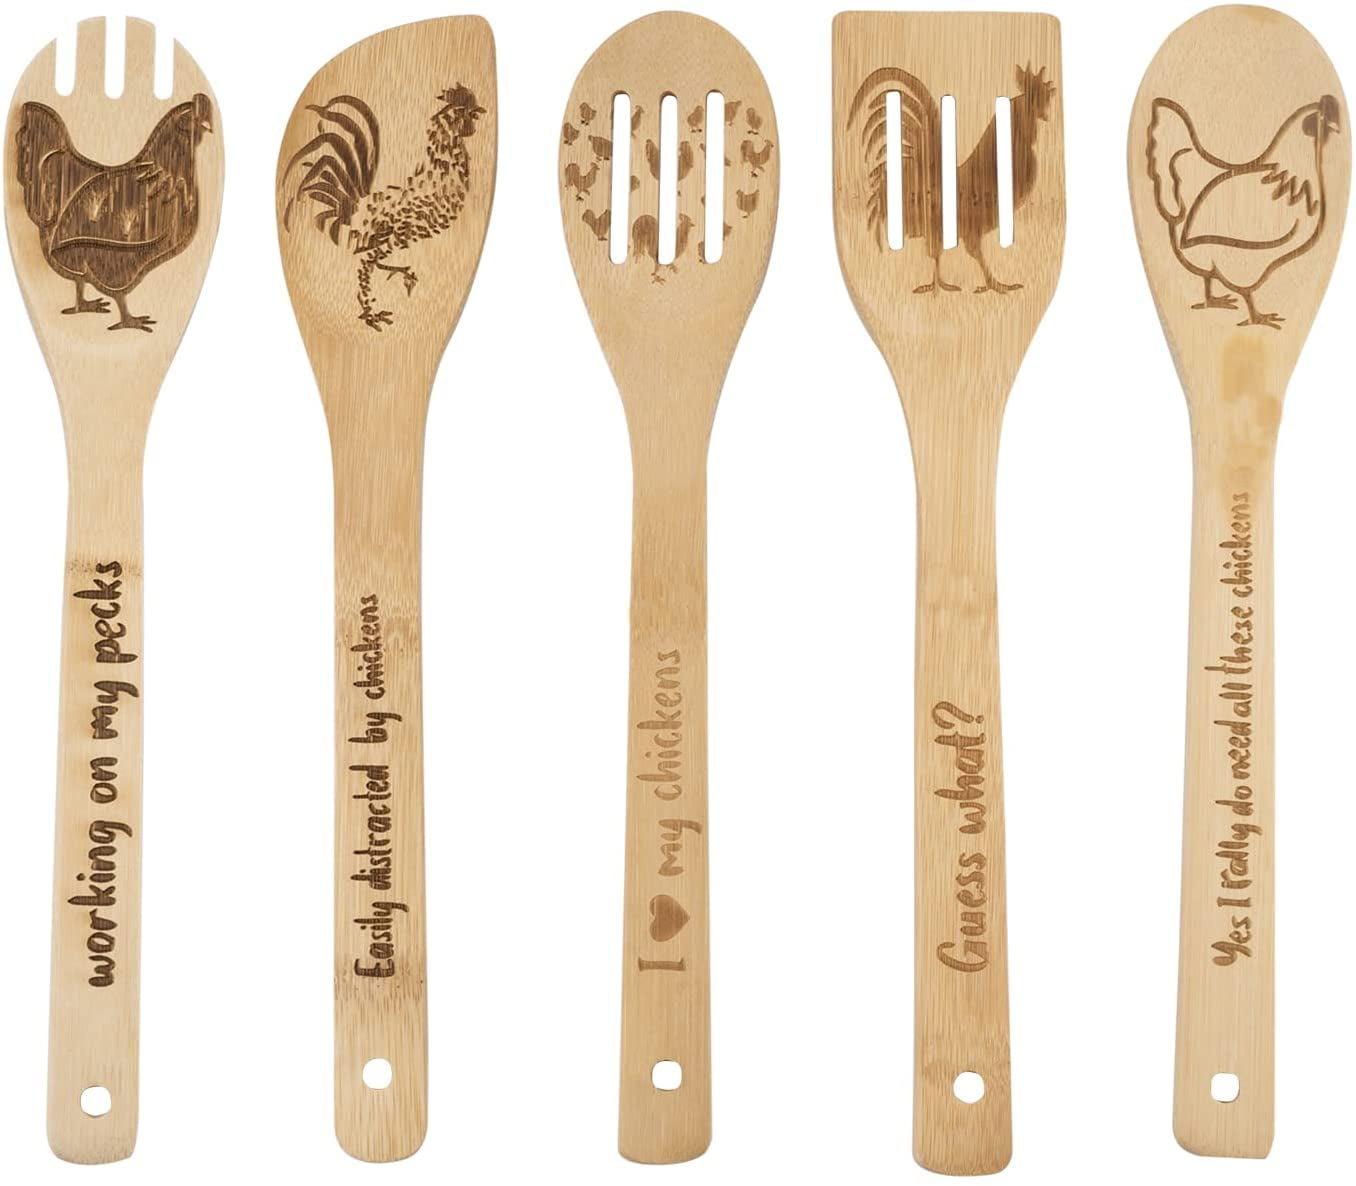 Personalized Wooden Spoon, Baking Gifts, Cooking Gifts, Bridal Shower Gift,  Unique Wedding Gift for Couple, Housewarming Gift, 